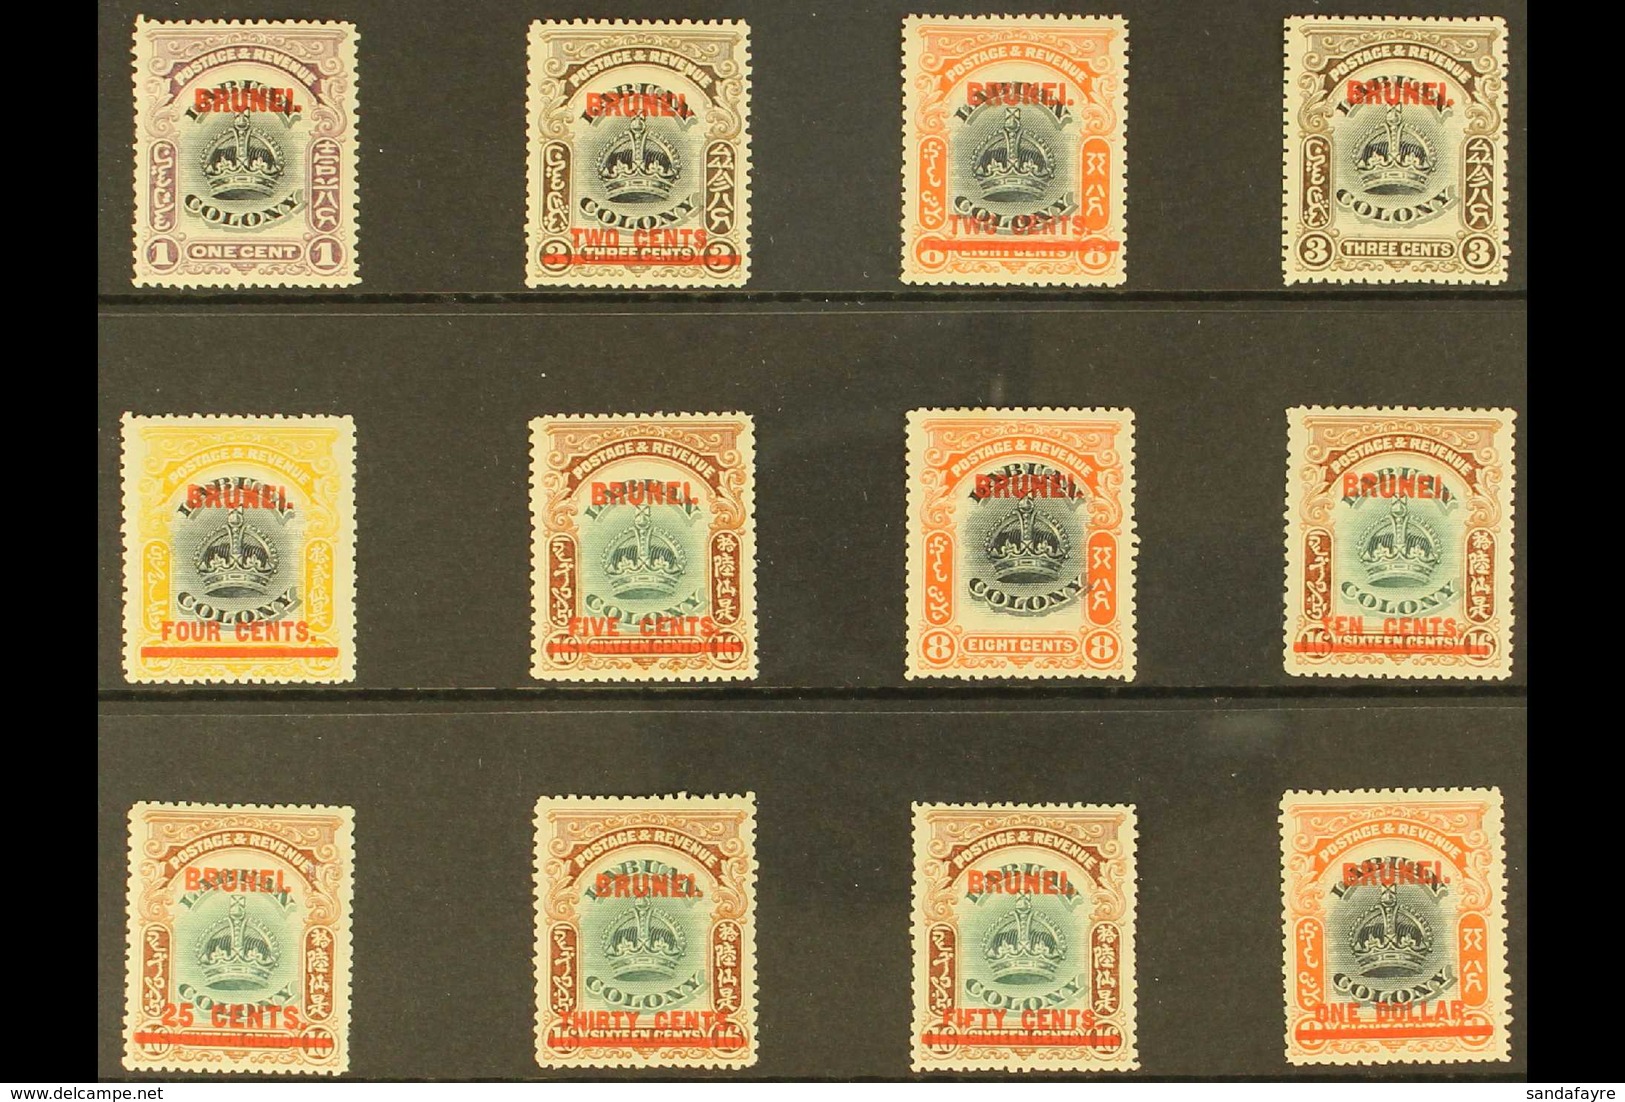 1906 Labuan Crown Colony "Brunei" Opt'd Set, SG 11/22, Fine Mint, Two Tiny Hinge Thins Do Not Detract (12 Stamps) For Mo - Brunei (...-1984)